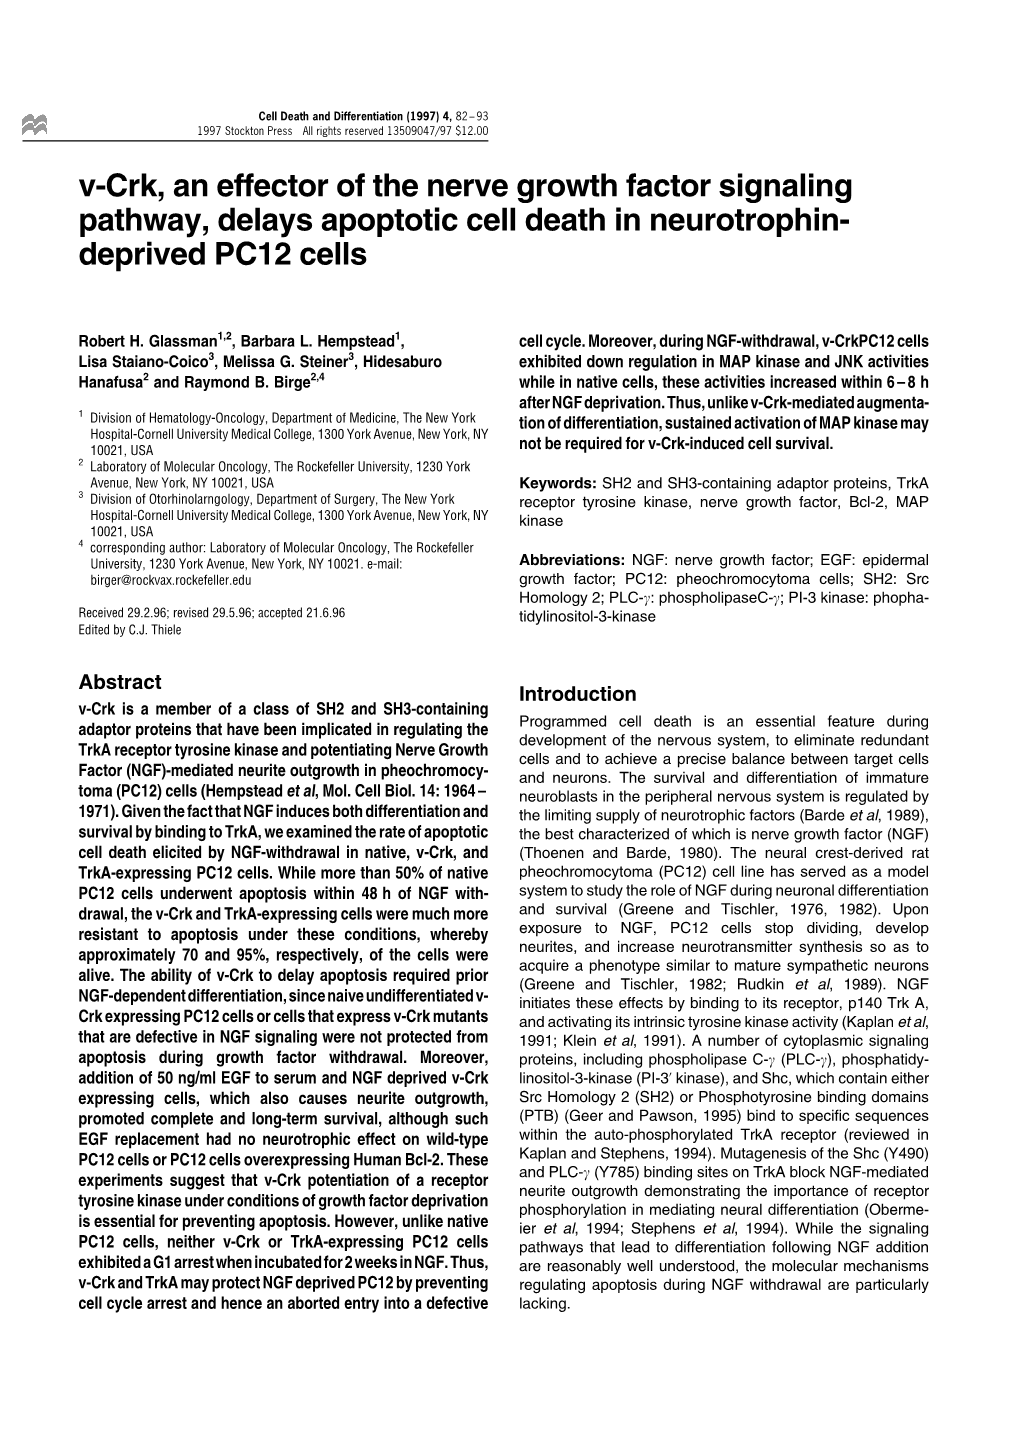 V-Crk, an Effector of the Nerve Growth Factor Signaling Pathway, Delays Apoptotic Cell Death in Neurotrophin- Deprived PC12 Cells